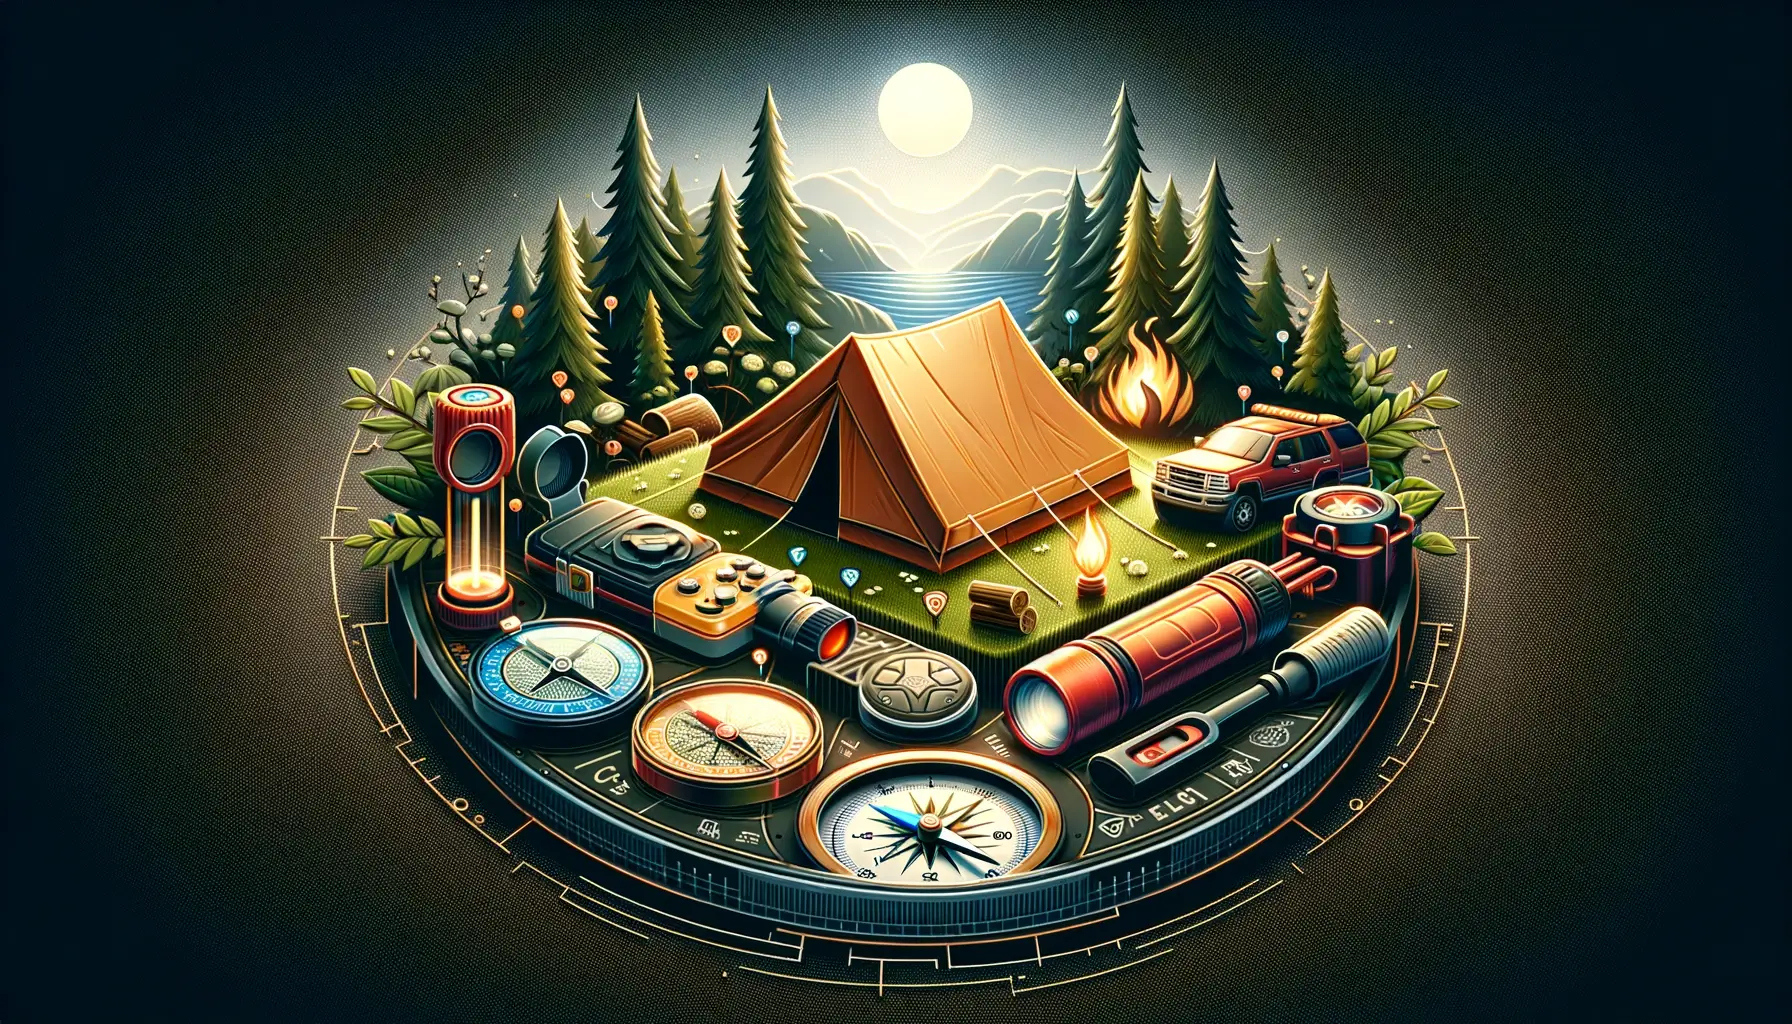 Essential Camping Safety Tips for New Campers